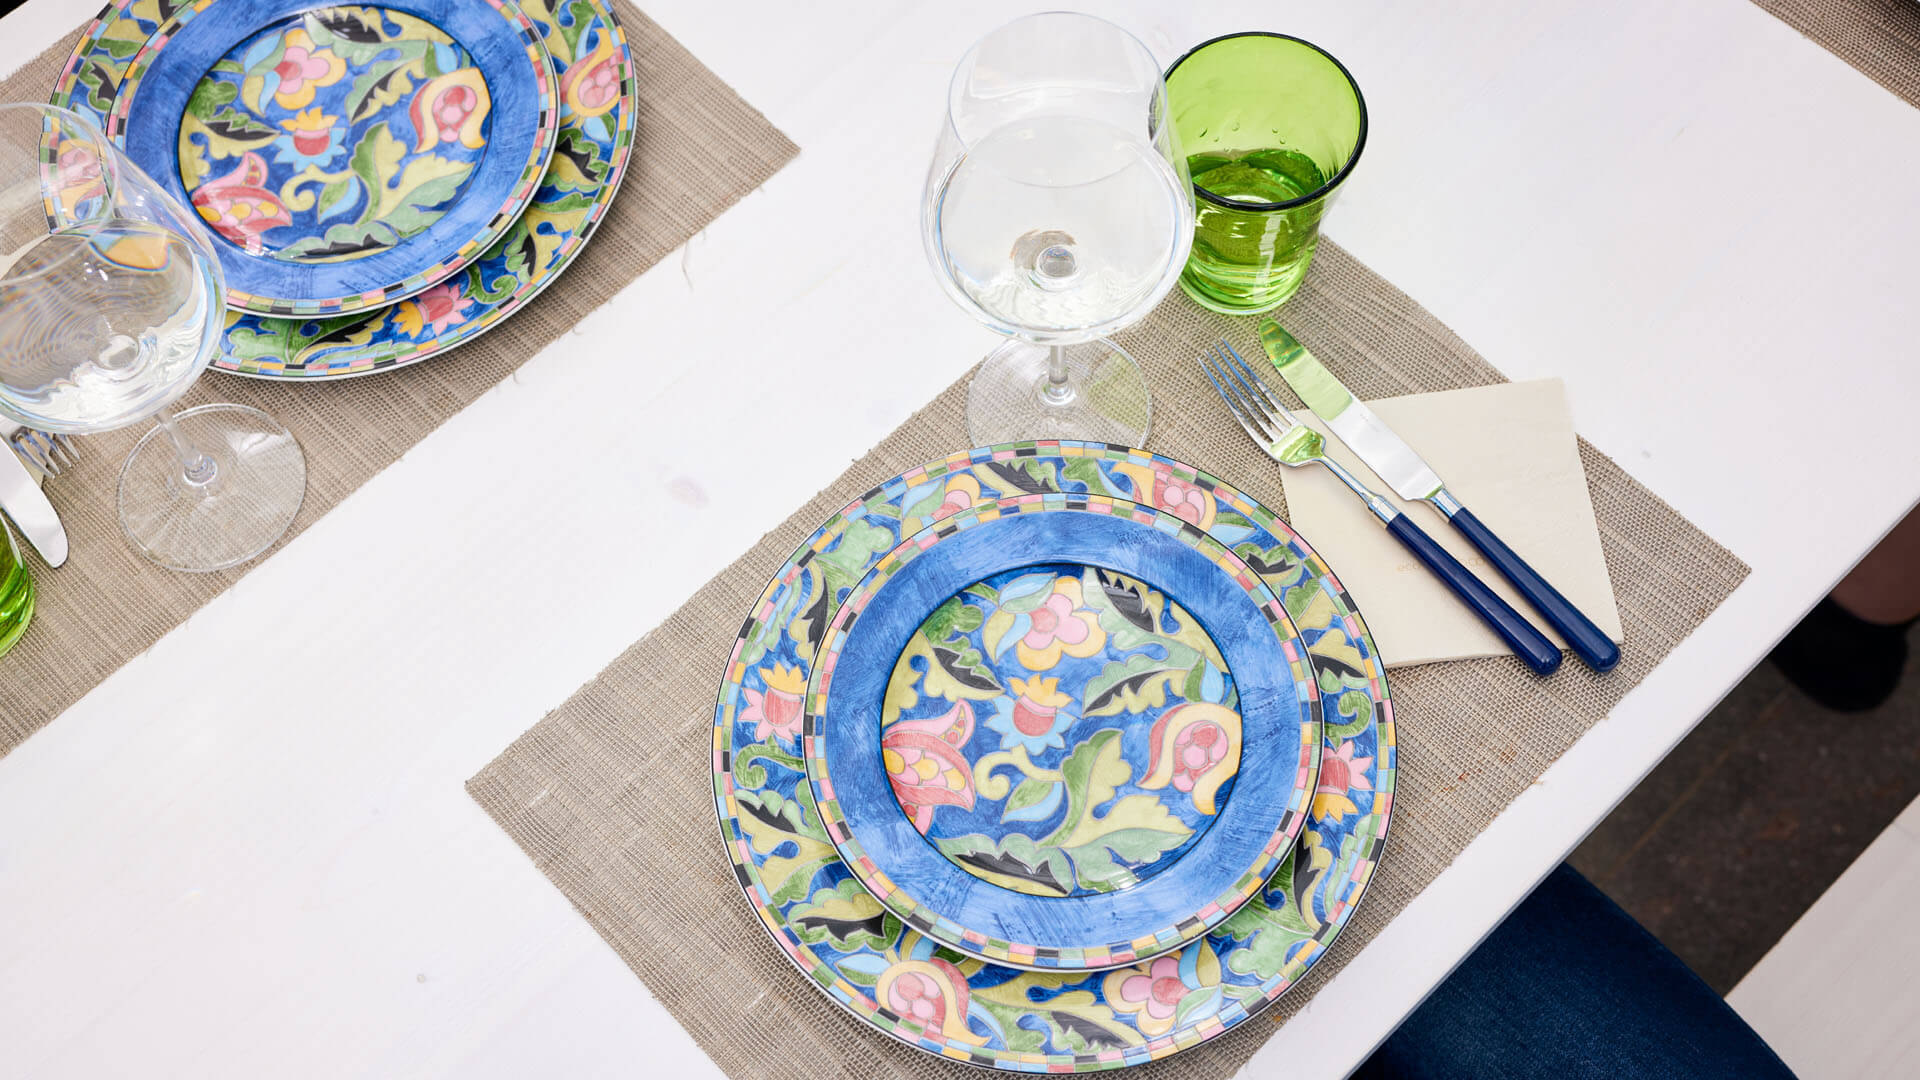 The Riva designer set has been decorated with colorful plates and glasses for the meal.